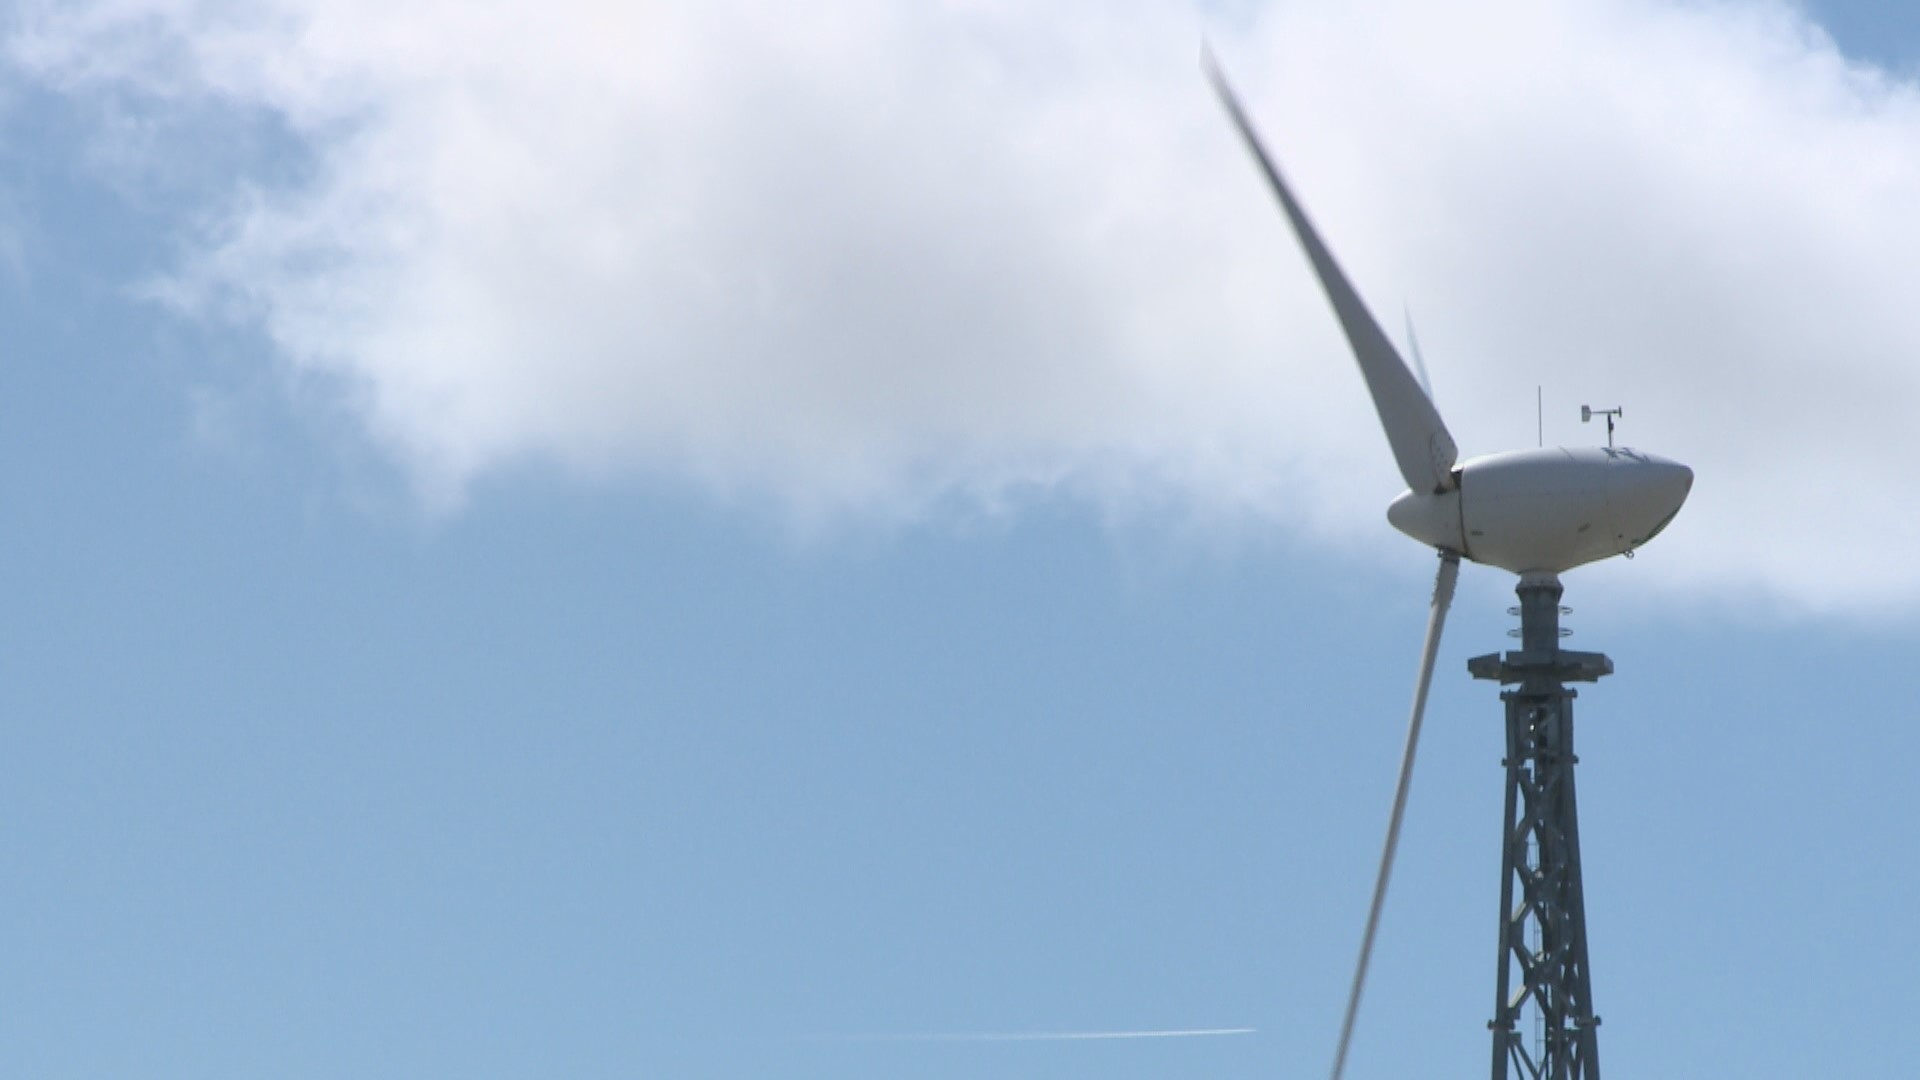 On Monticello farmer Jason Russell's farm, nearly 100% of the site's electricity is generated through his wind turbine and solar panels.